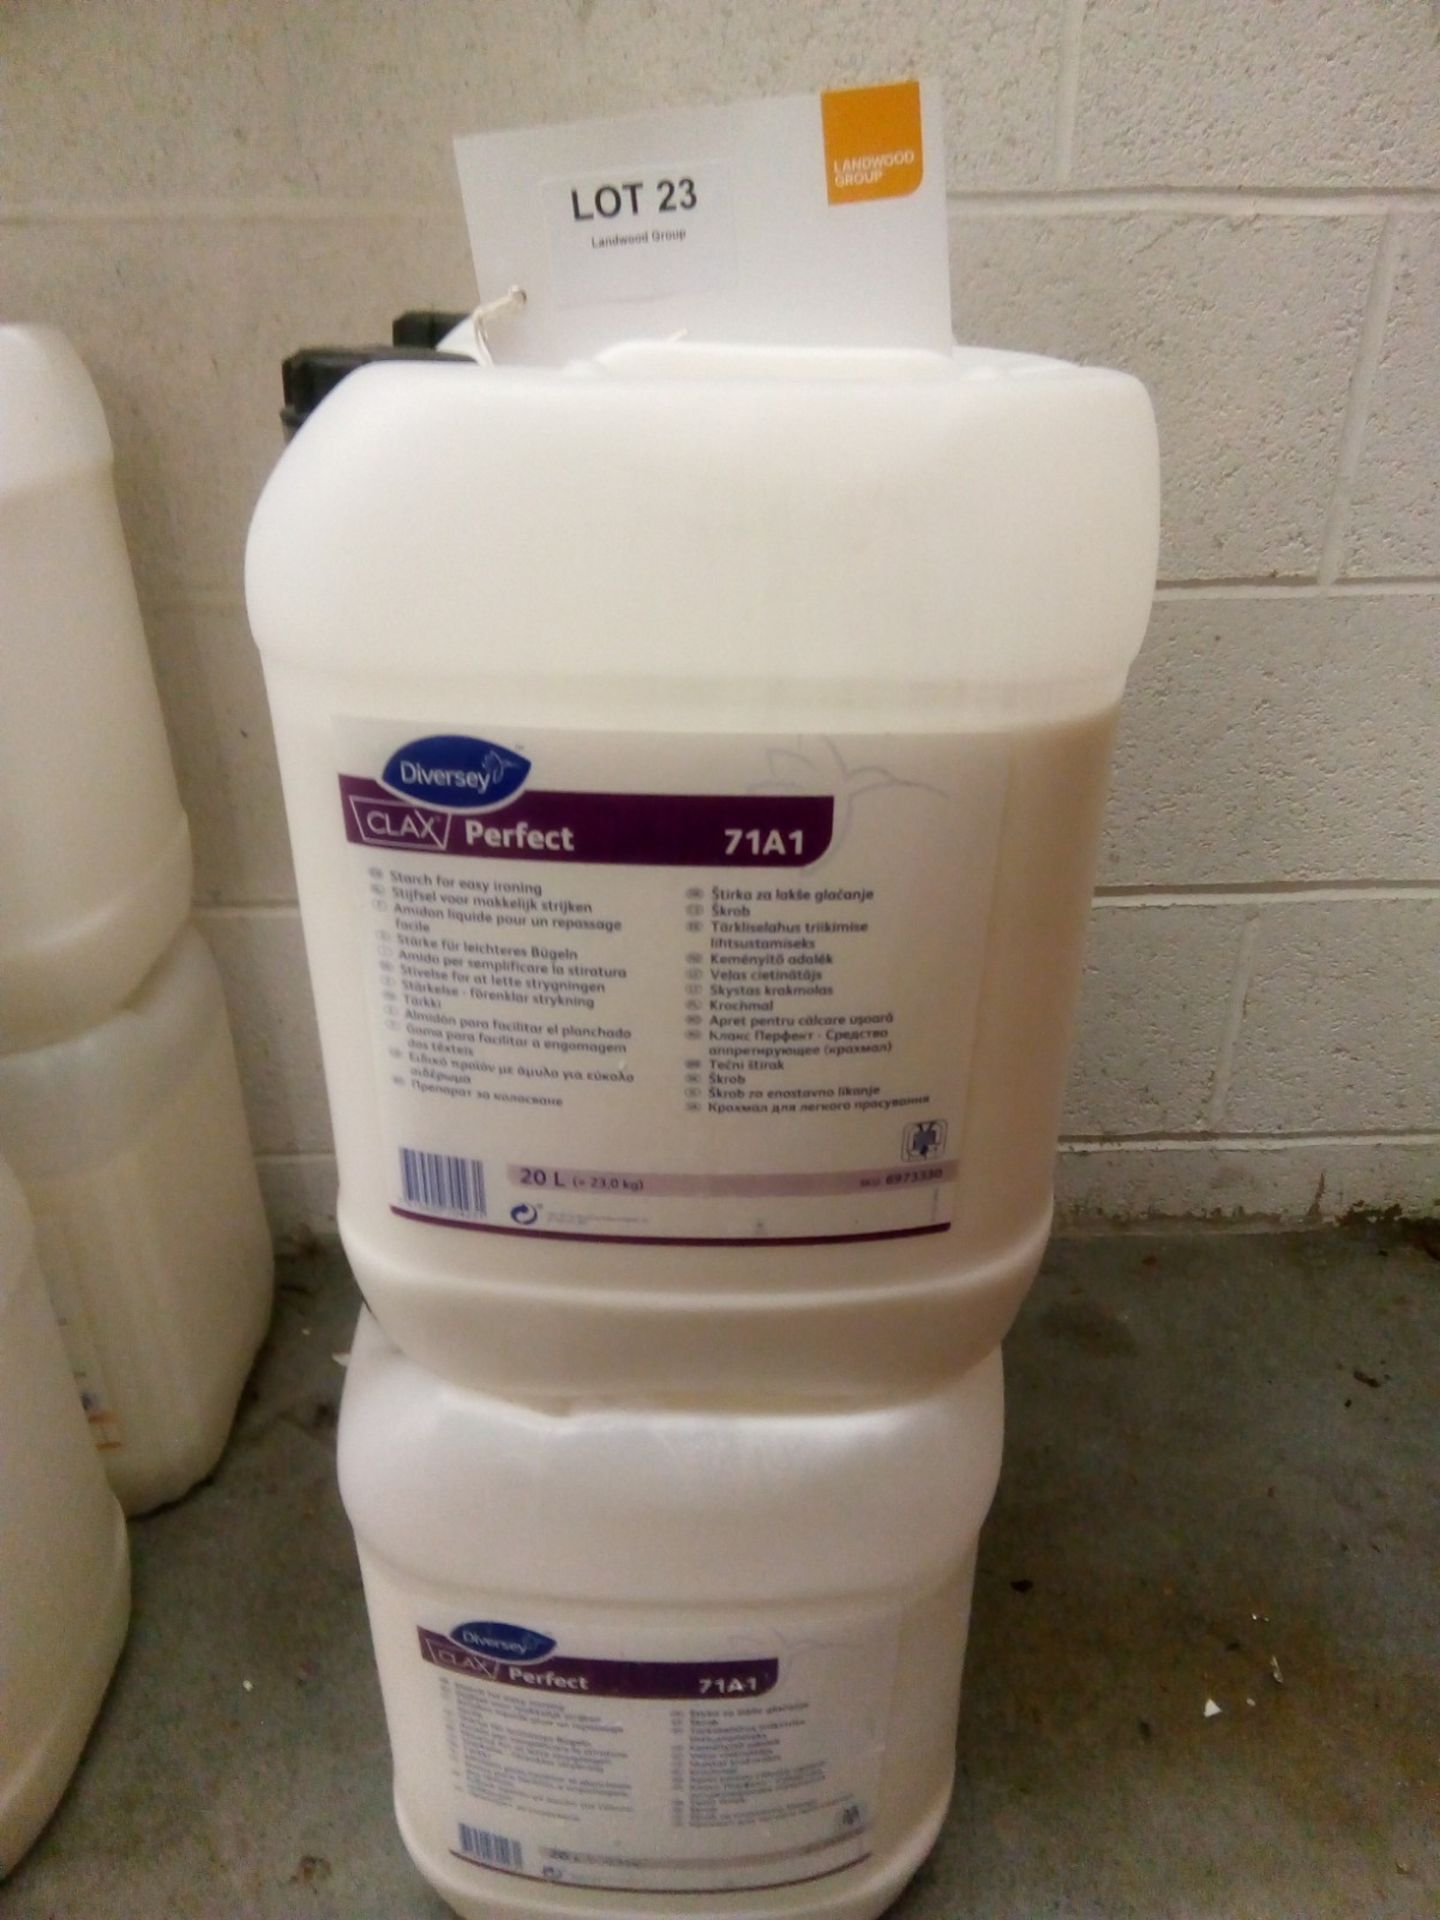 4 x 20 litre DIVERSEY Clax Perfect 71A1. Starch for easy ironing.